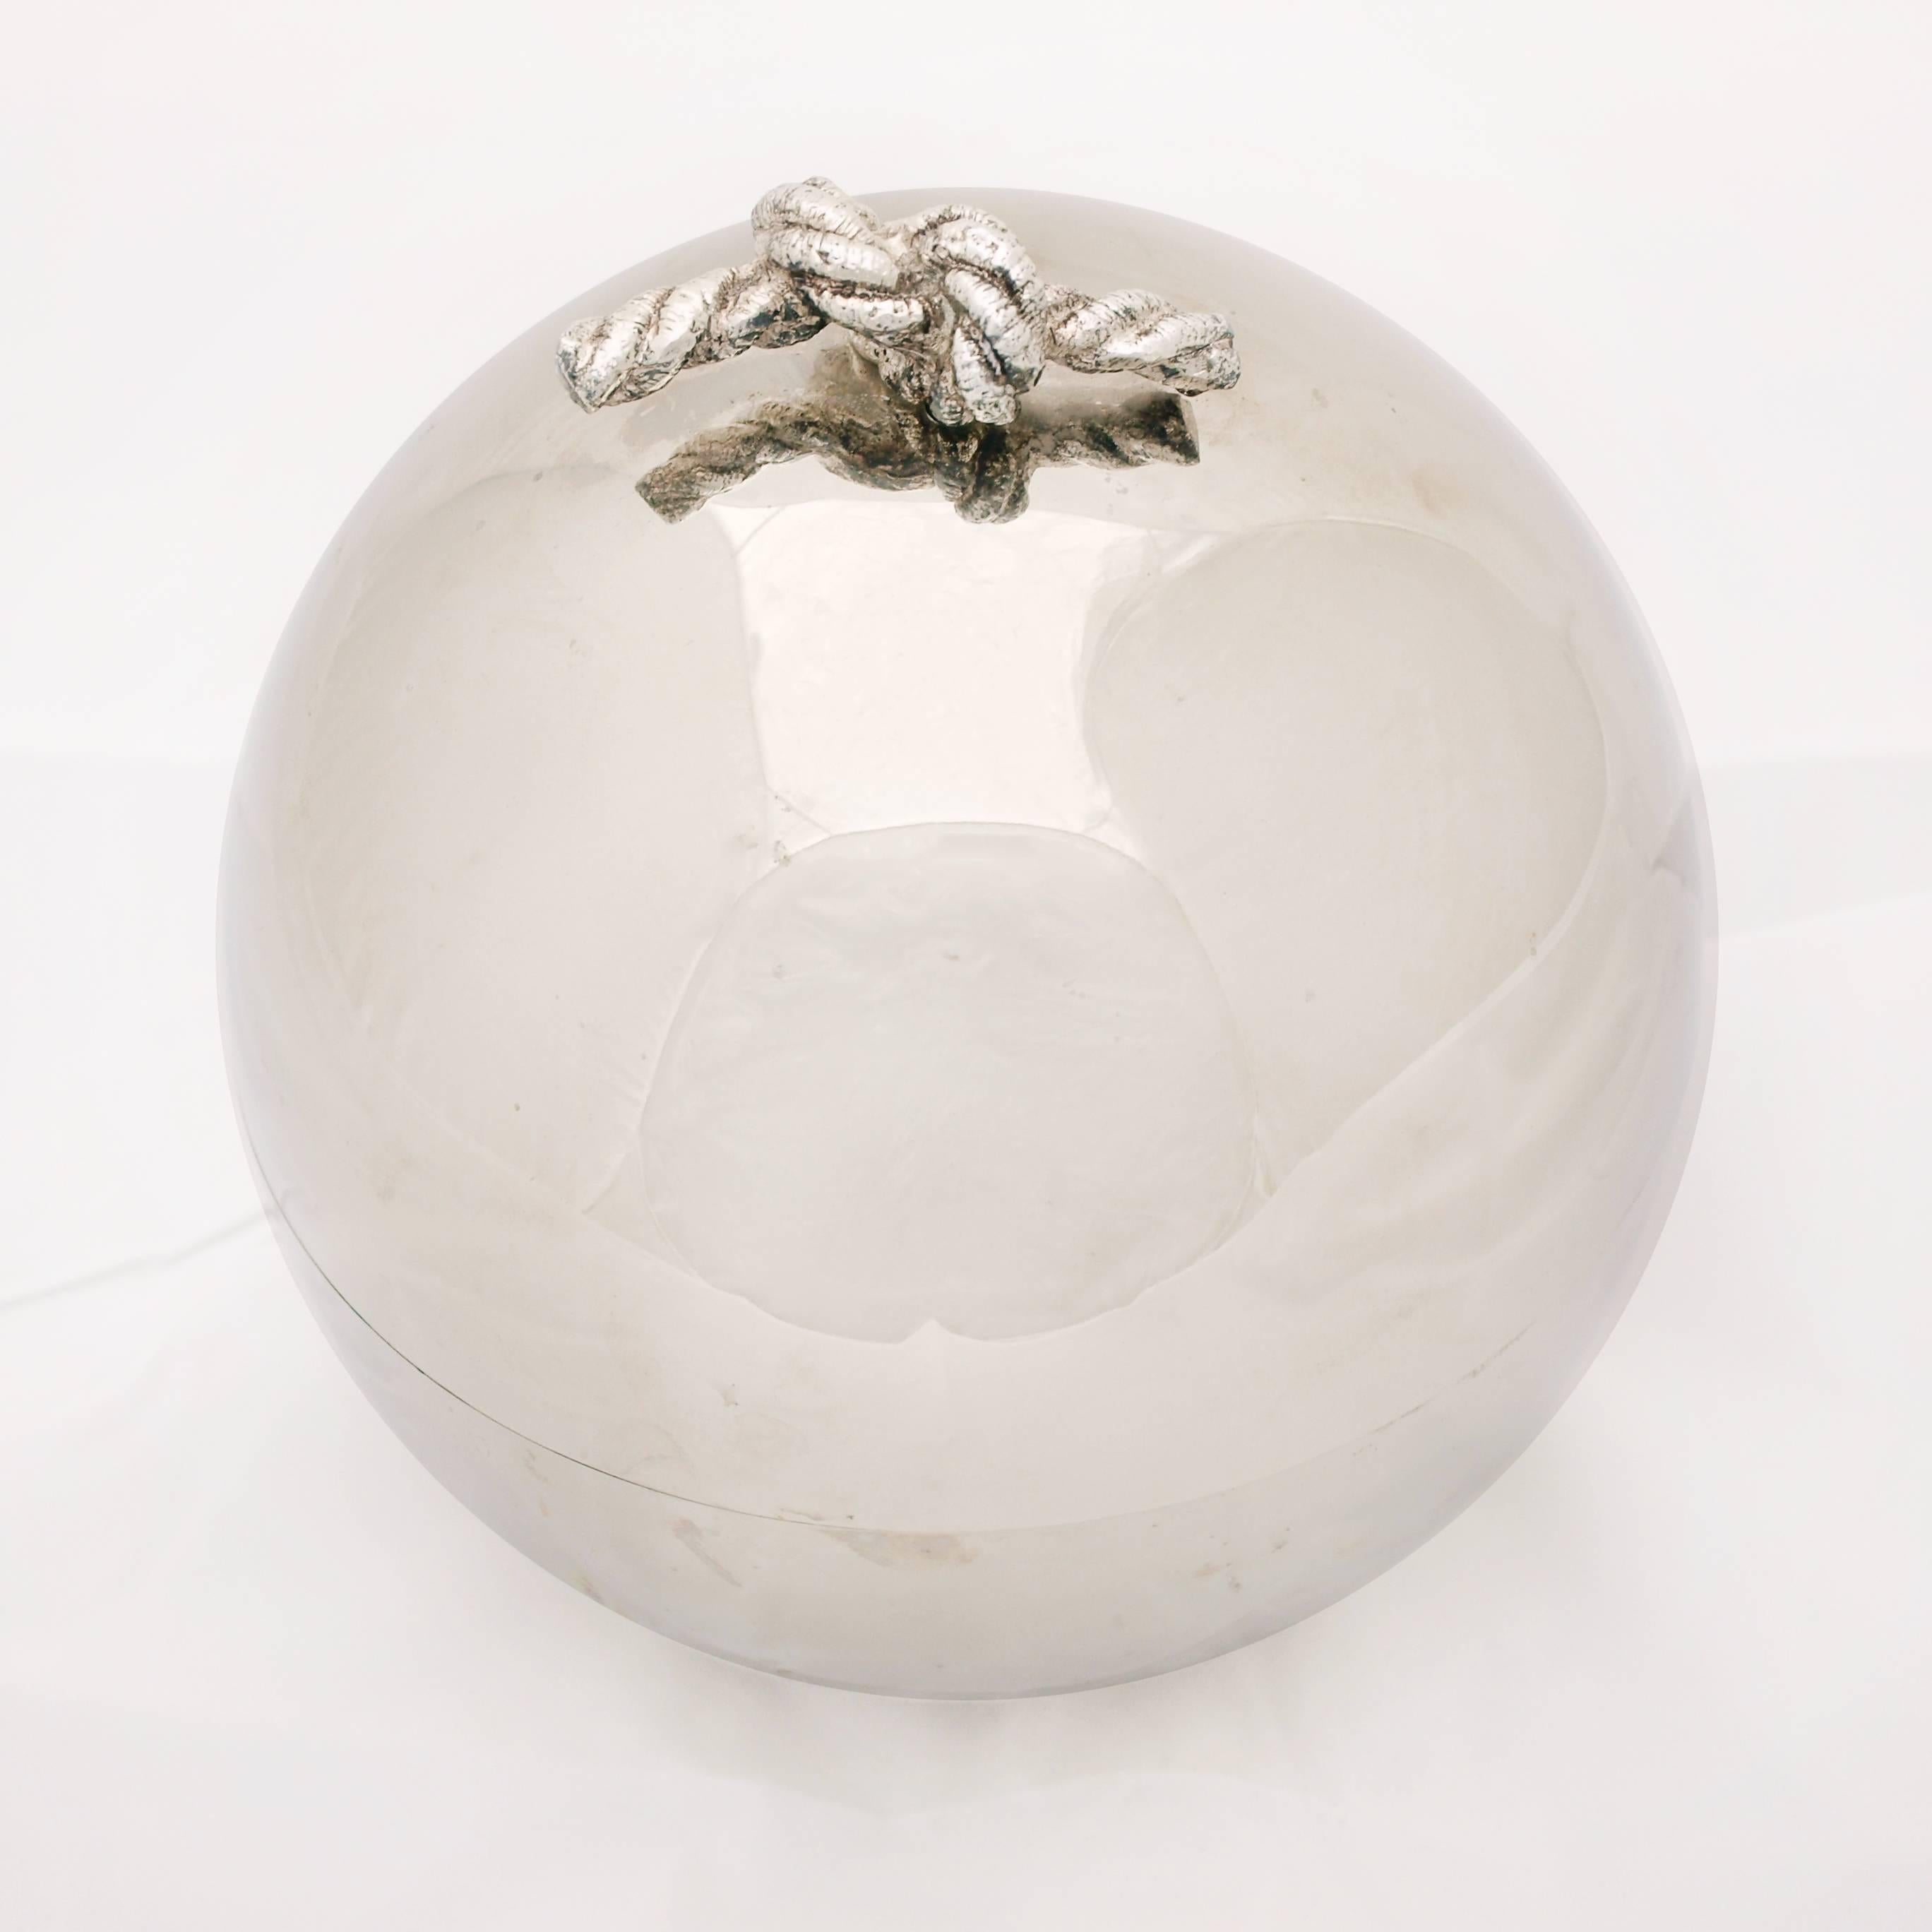 A 1970s spherical chrome effect ice bucket by The Turnwald collection. The lid of the ice bucket features a silver plated handle in the form of a knotted piece of rope. The lid meets the body neatly at the horizontal circumference. This is a